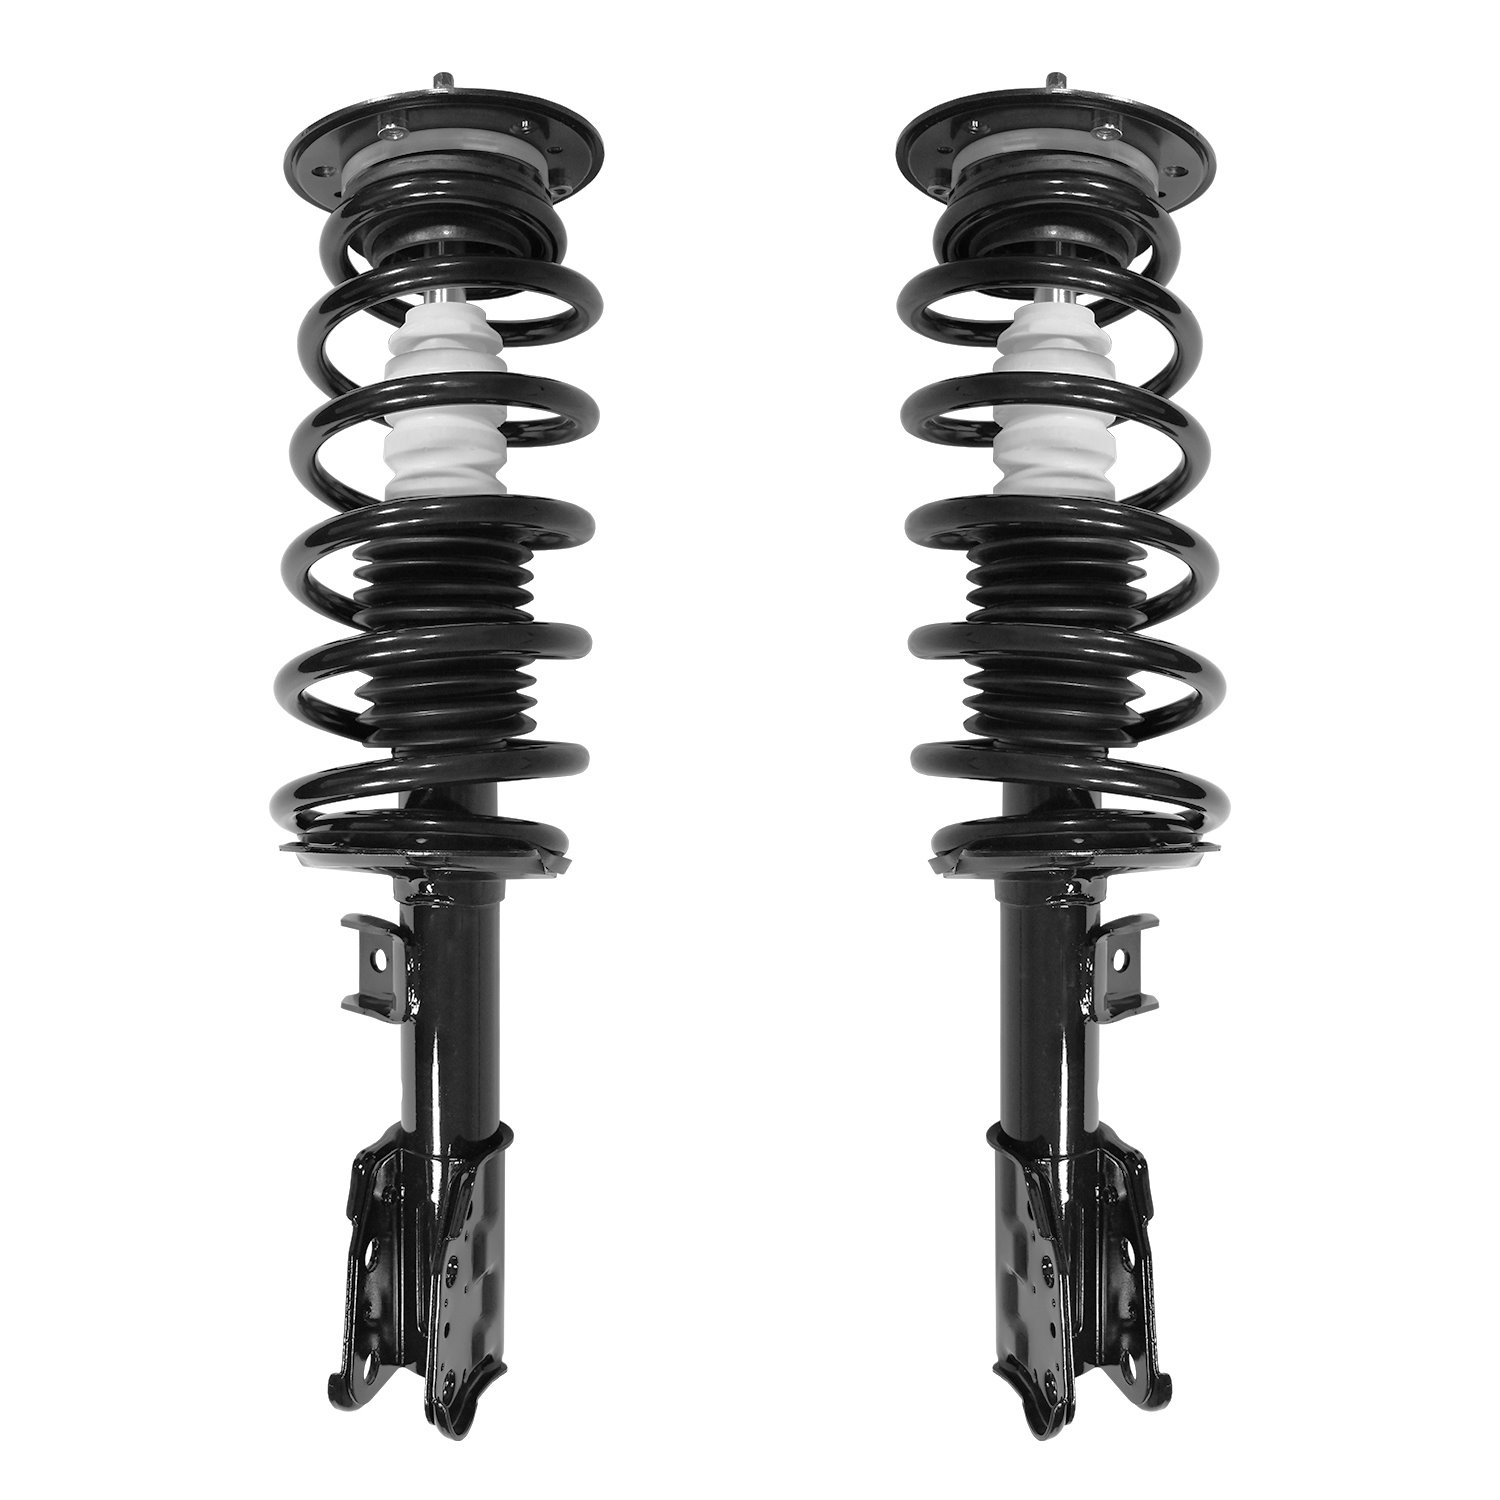 2-11011-11012-001 Suspension Strut & Coil Spring Assembly Set Fits Select Chevy Equinox, Pontiac Torrent